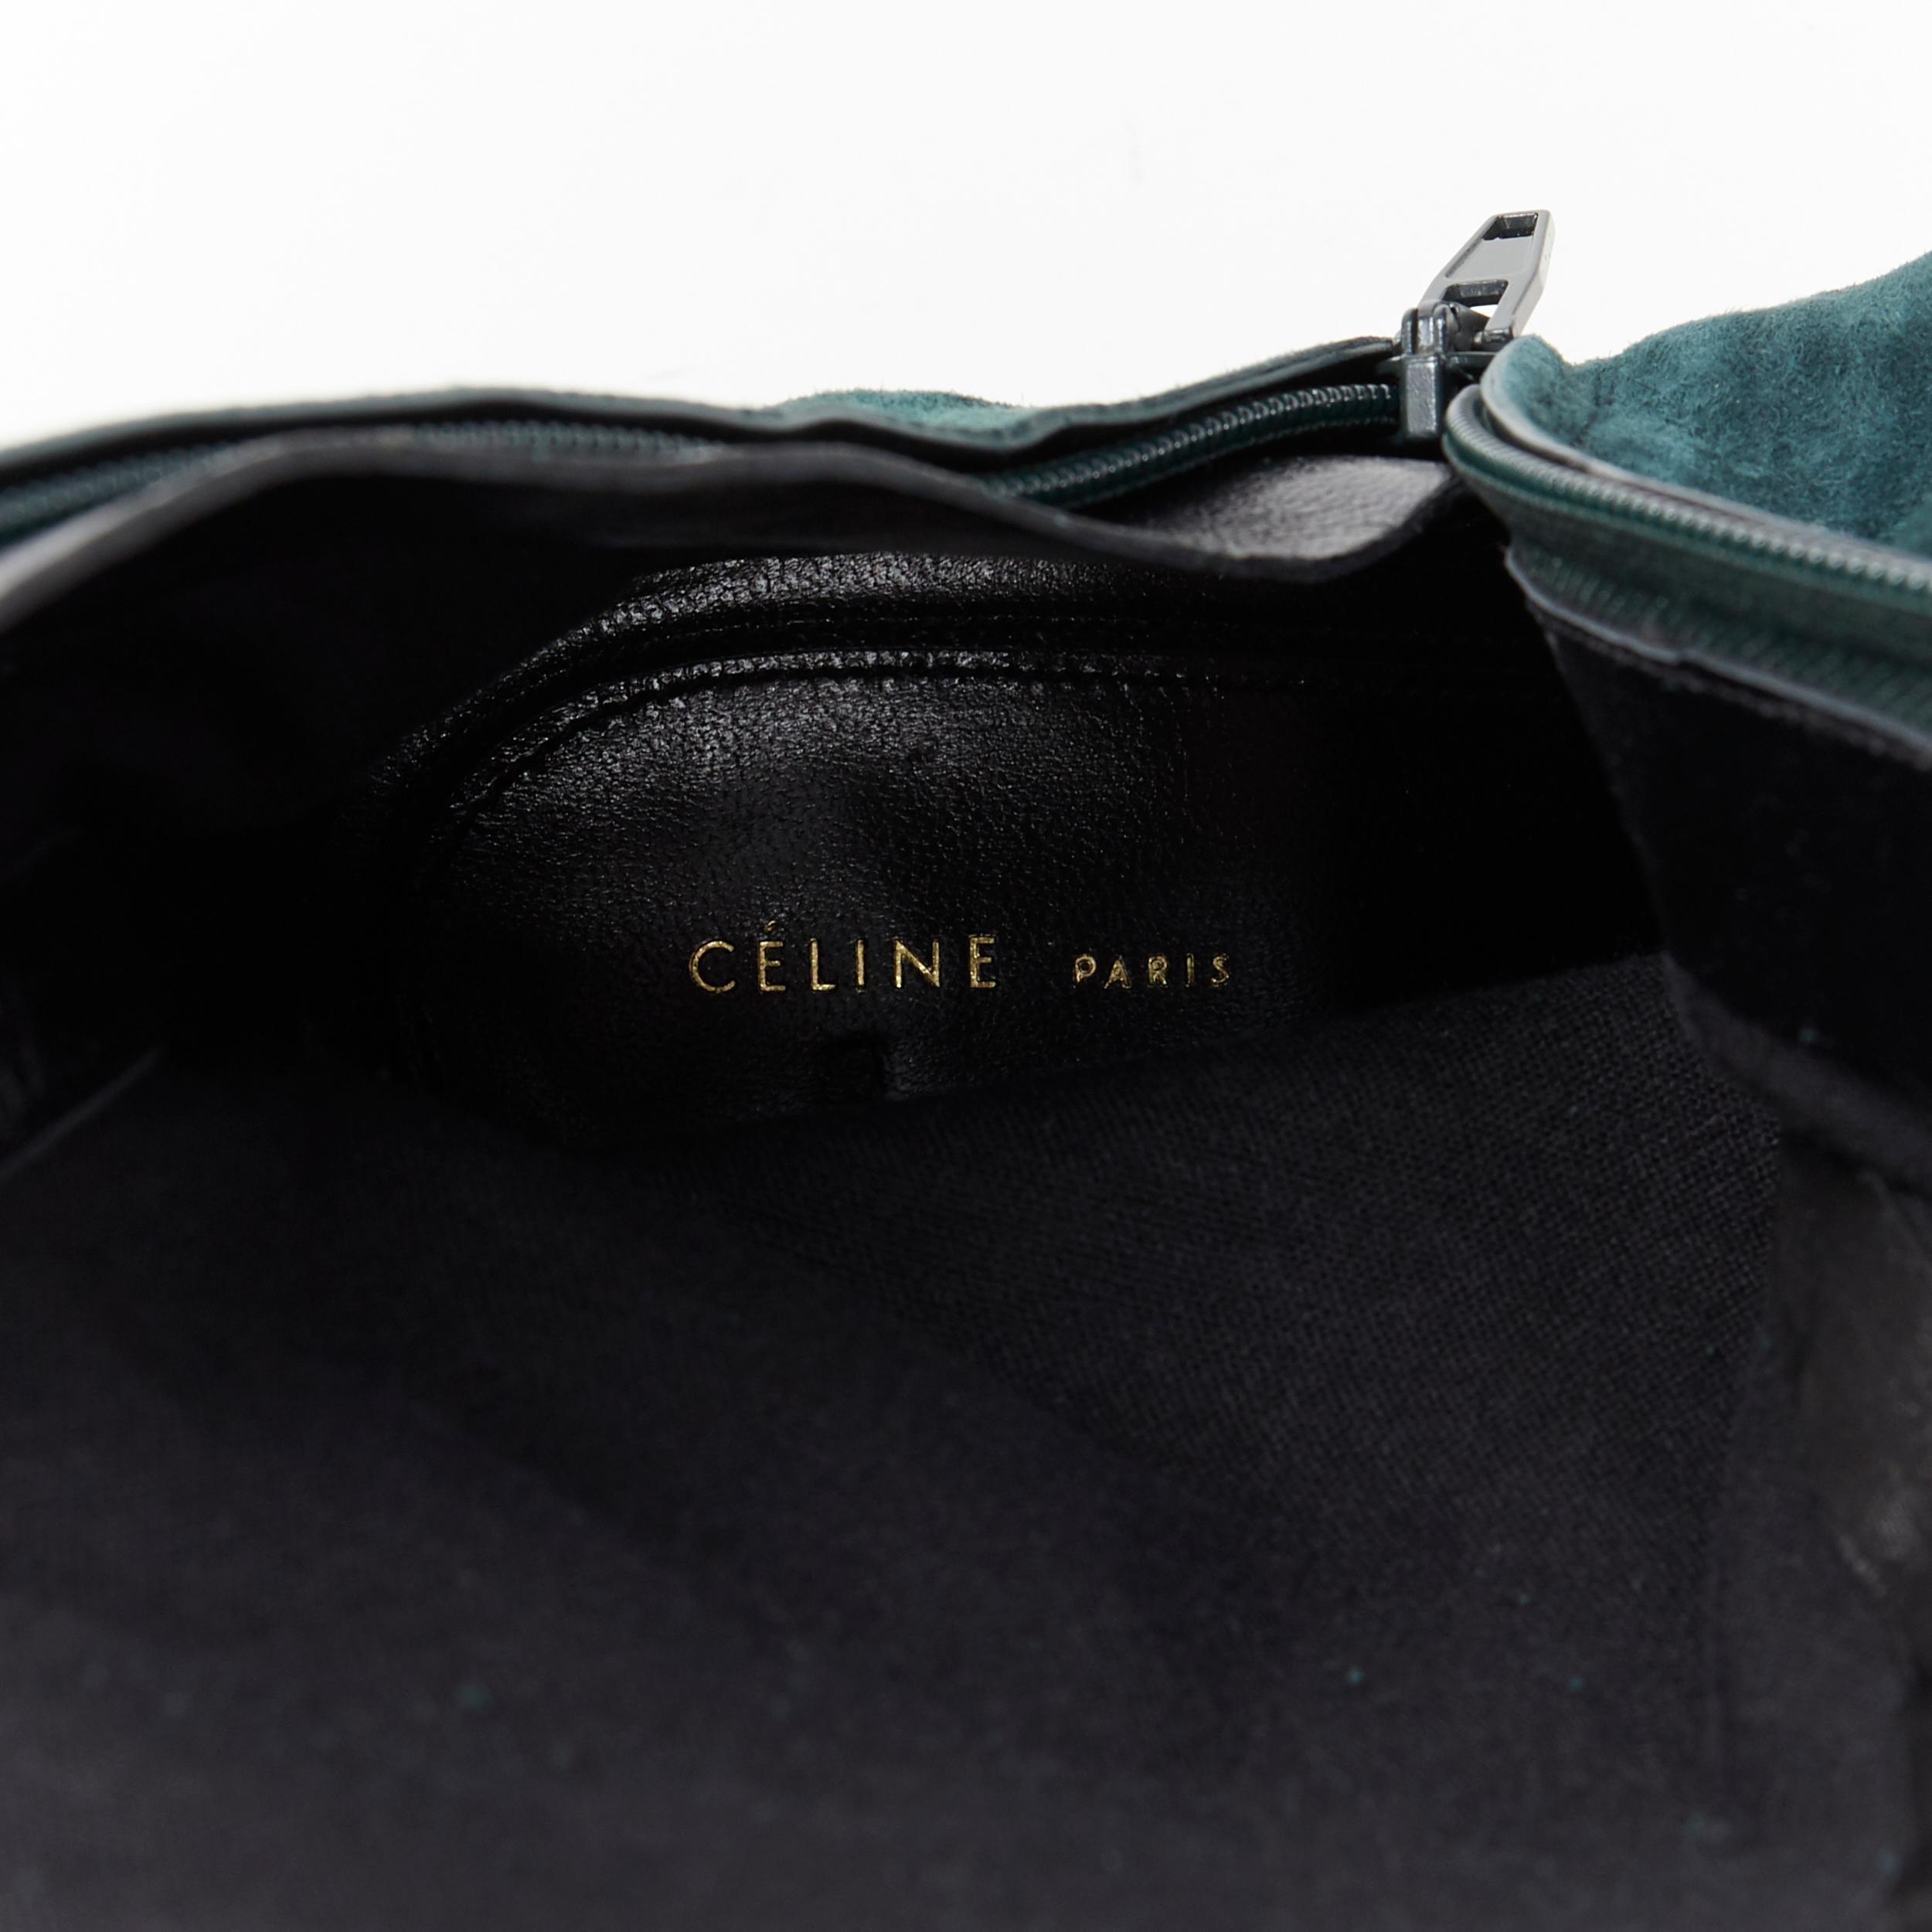 new OLD CELINE Madame Flare forest green stretch suede square toe bootie EU40 2